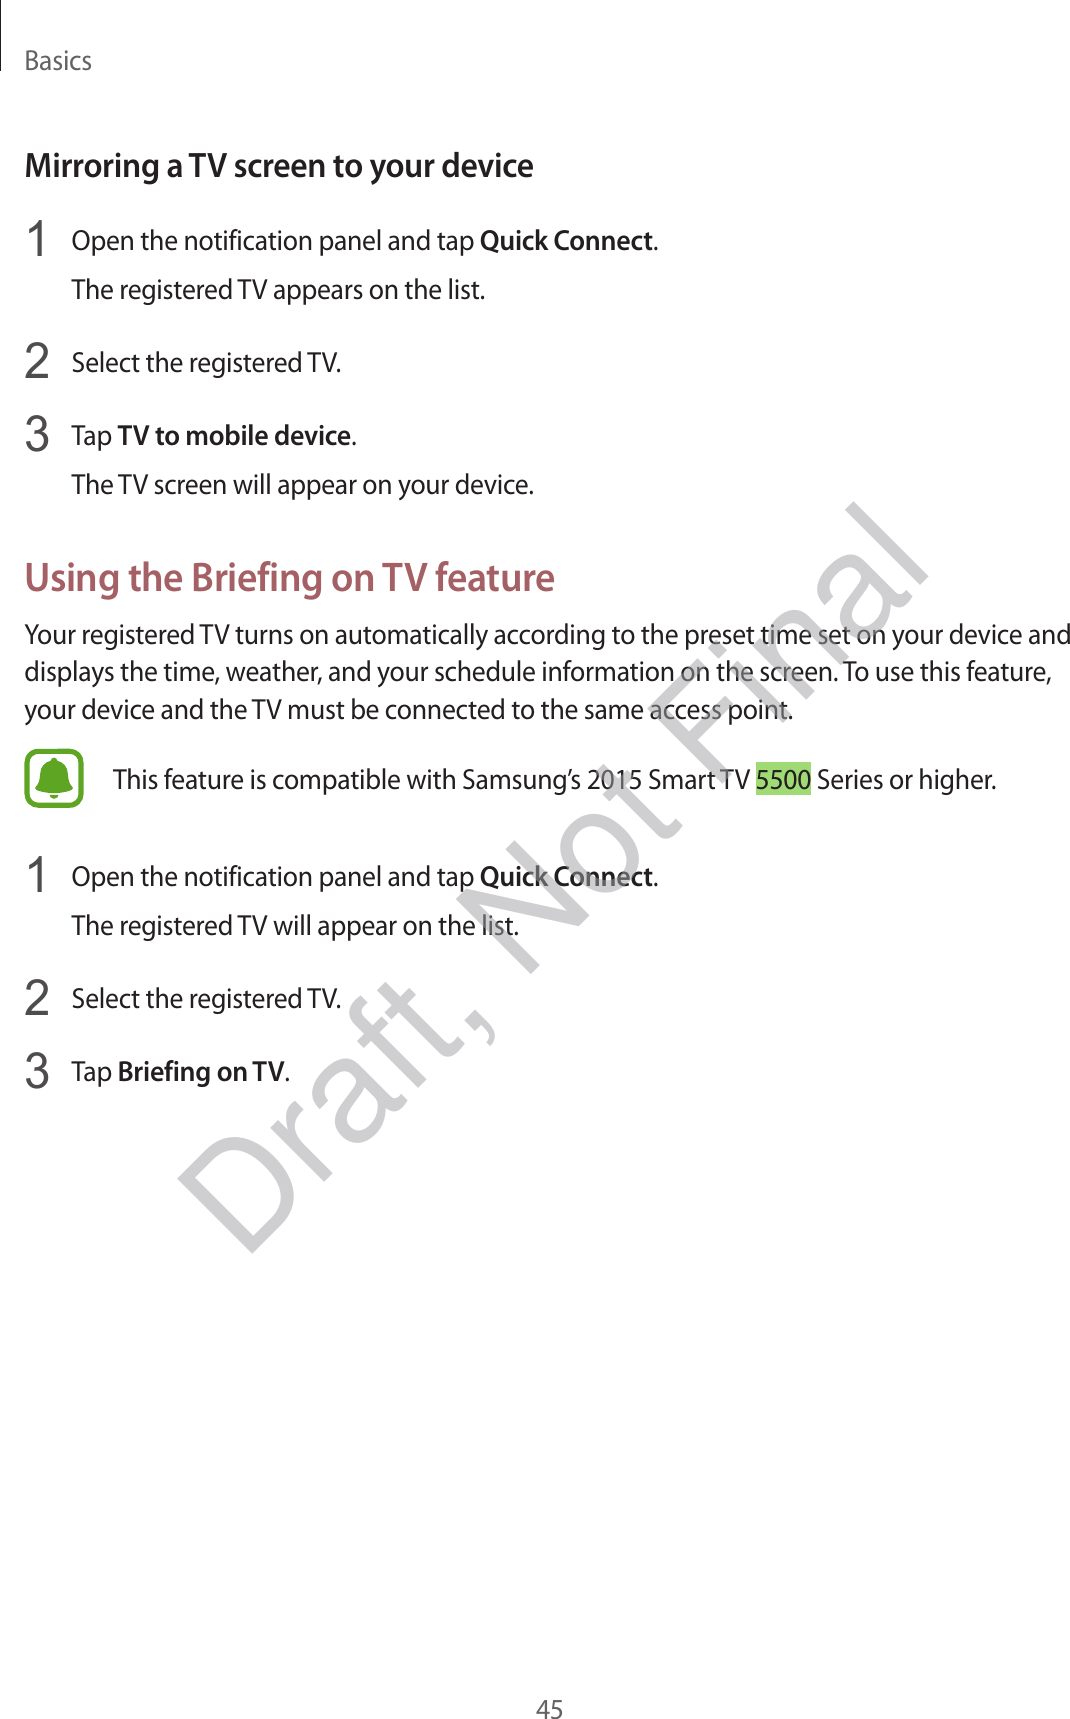 Basics45Mirroring a TV screen to your device1  Open the notification panel and tap Quick Connect.The registered TV appears on the list.2  Select the registered TV.3  Tap TV to mobile device.The TV screen will appear on your device.Using the Briefing on TV featureYour registered TV turns on automatically according to the preset time set on your device and displays the time, weather, and your schedule information on the screen. To use this feature, your device and the TV must be connected to the same access point.This feature is compatible with Samsung’s 2015 Smart TV 5500 Series or higher.1  Open the notification panel and tap Quick Connect.The registered TV will appear on the list.2  Select the registered TV.3  Tap Briefing on TV.Draft, Not Final